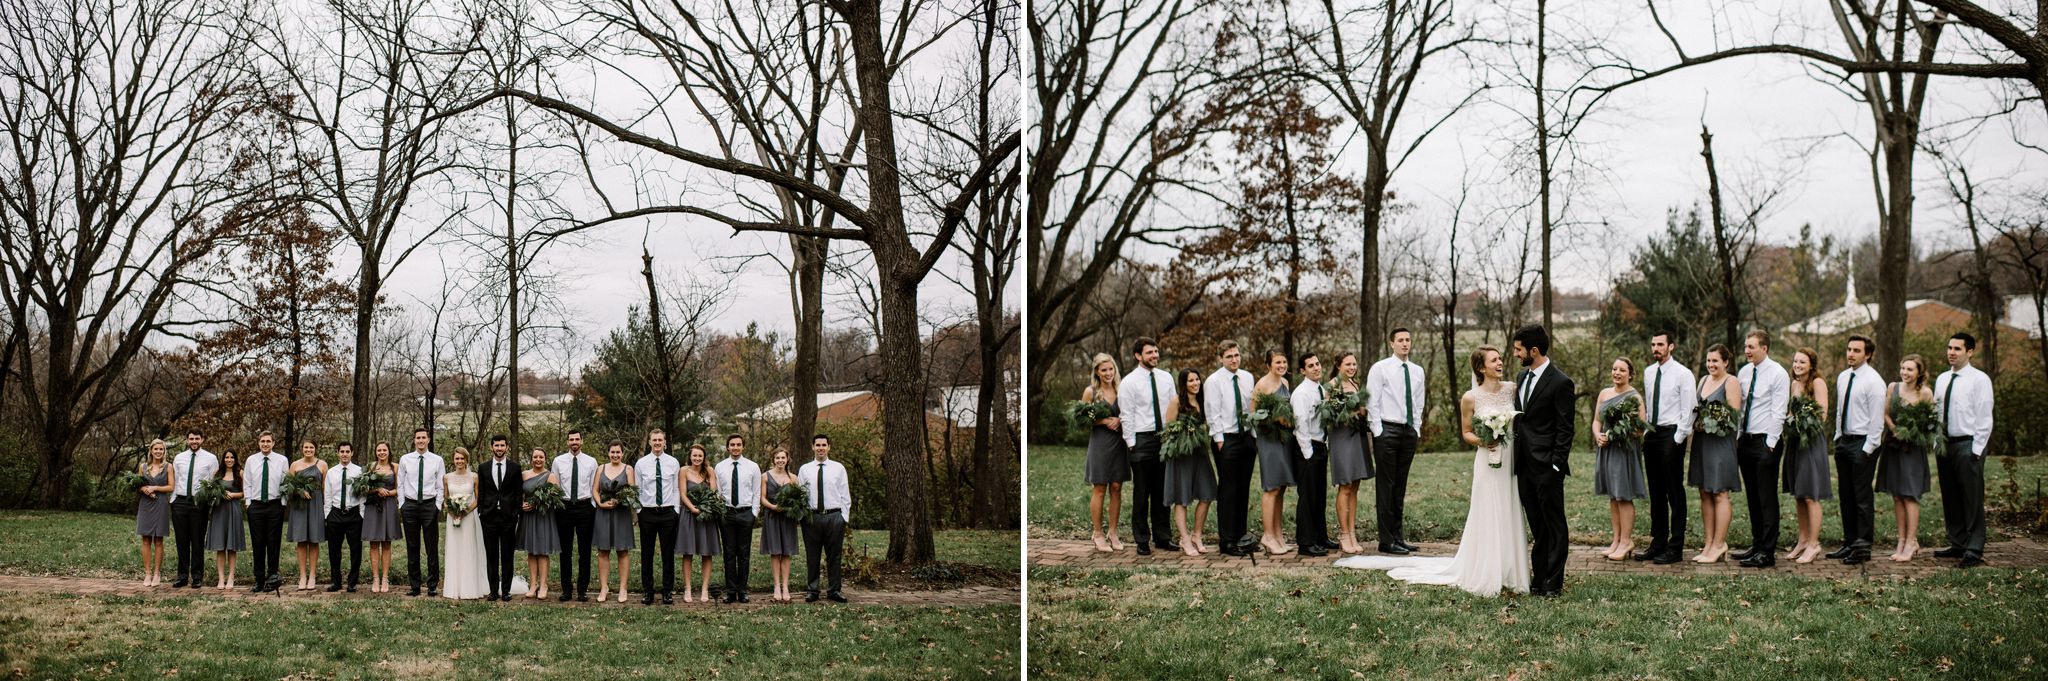 The wedding party poses for a group photo on the grounds of the Larimore House in Spanish Lake, MO 